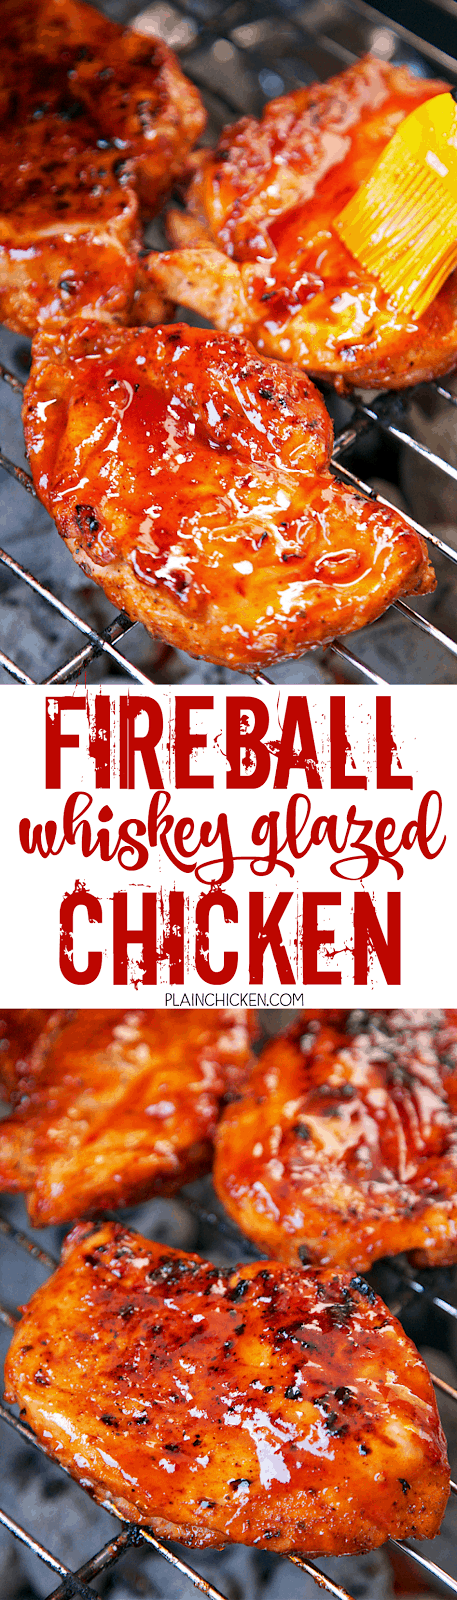 Fireball Whiskey Glazed Chicken - chicken basted with an amazing homemade Fireball BBQ sauce. Ketchup, red pepper jelly, vinegar, onion, garlic, cayenne pepper and Fireball Whiskey. This is SO good! I made this for a party and everyone raved about it! A new favorite! Can make the Fireball BBQ sauce ahead of time and refrigerate for later. We ate this 2 weeks in a row!!